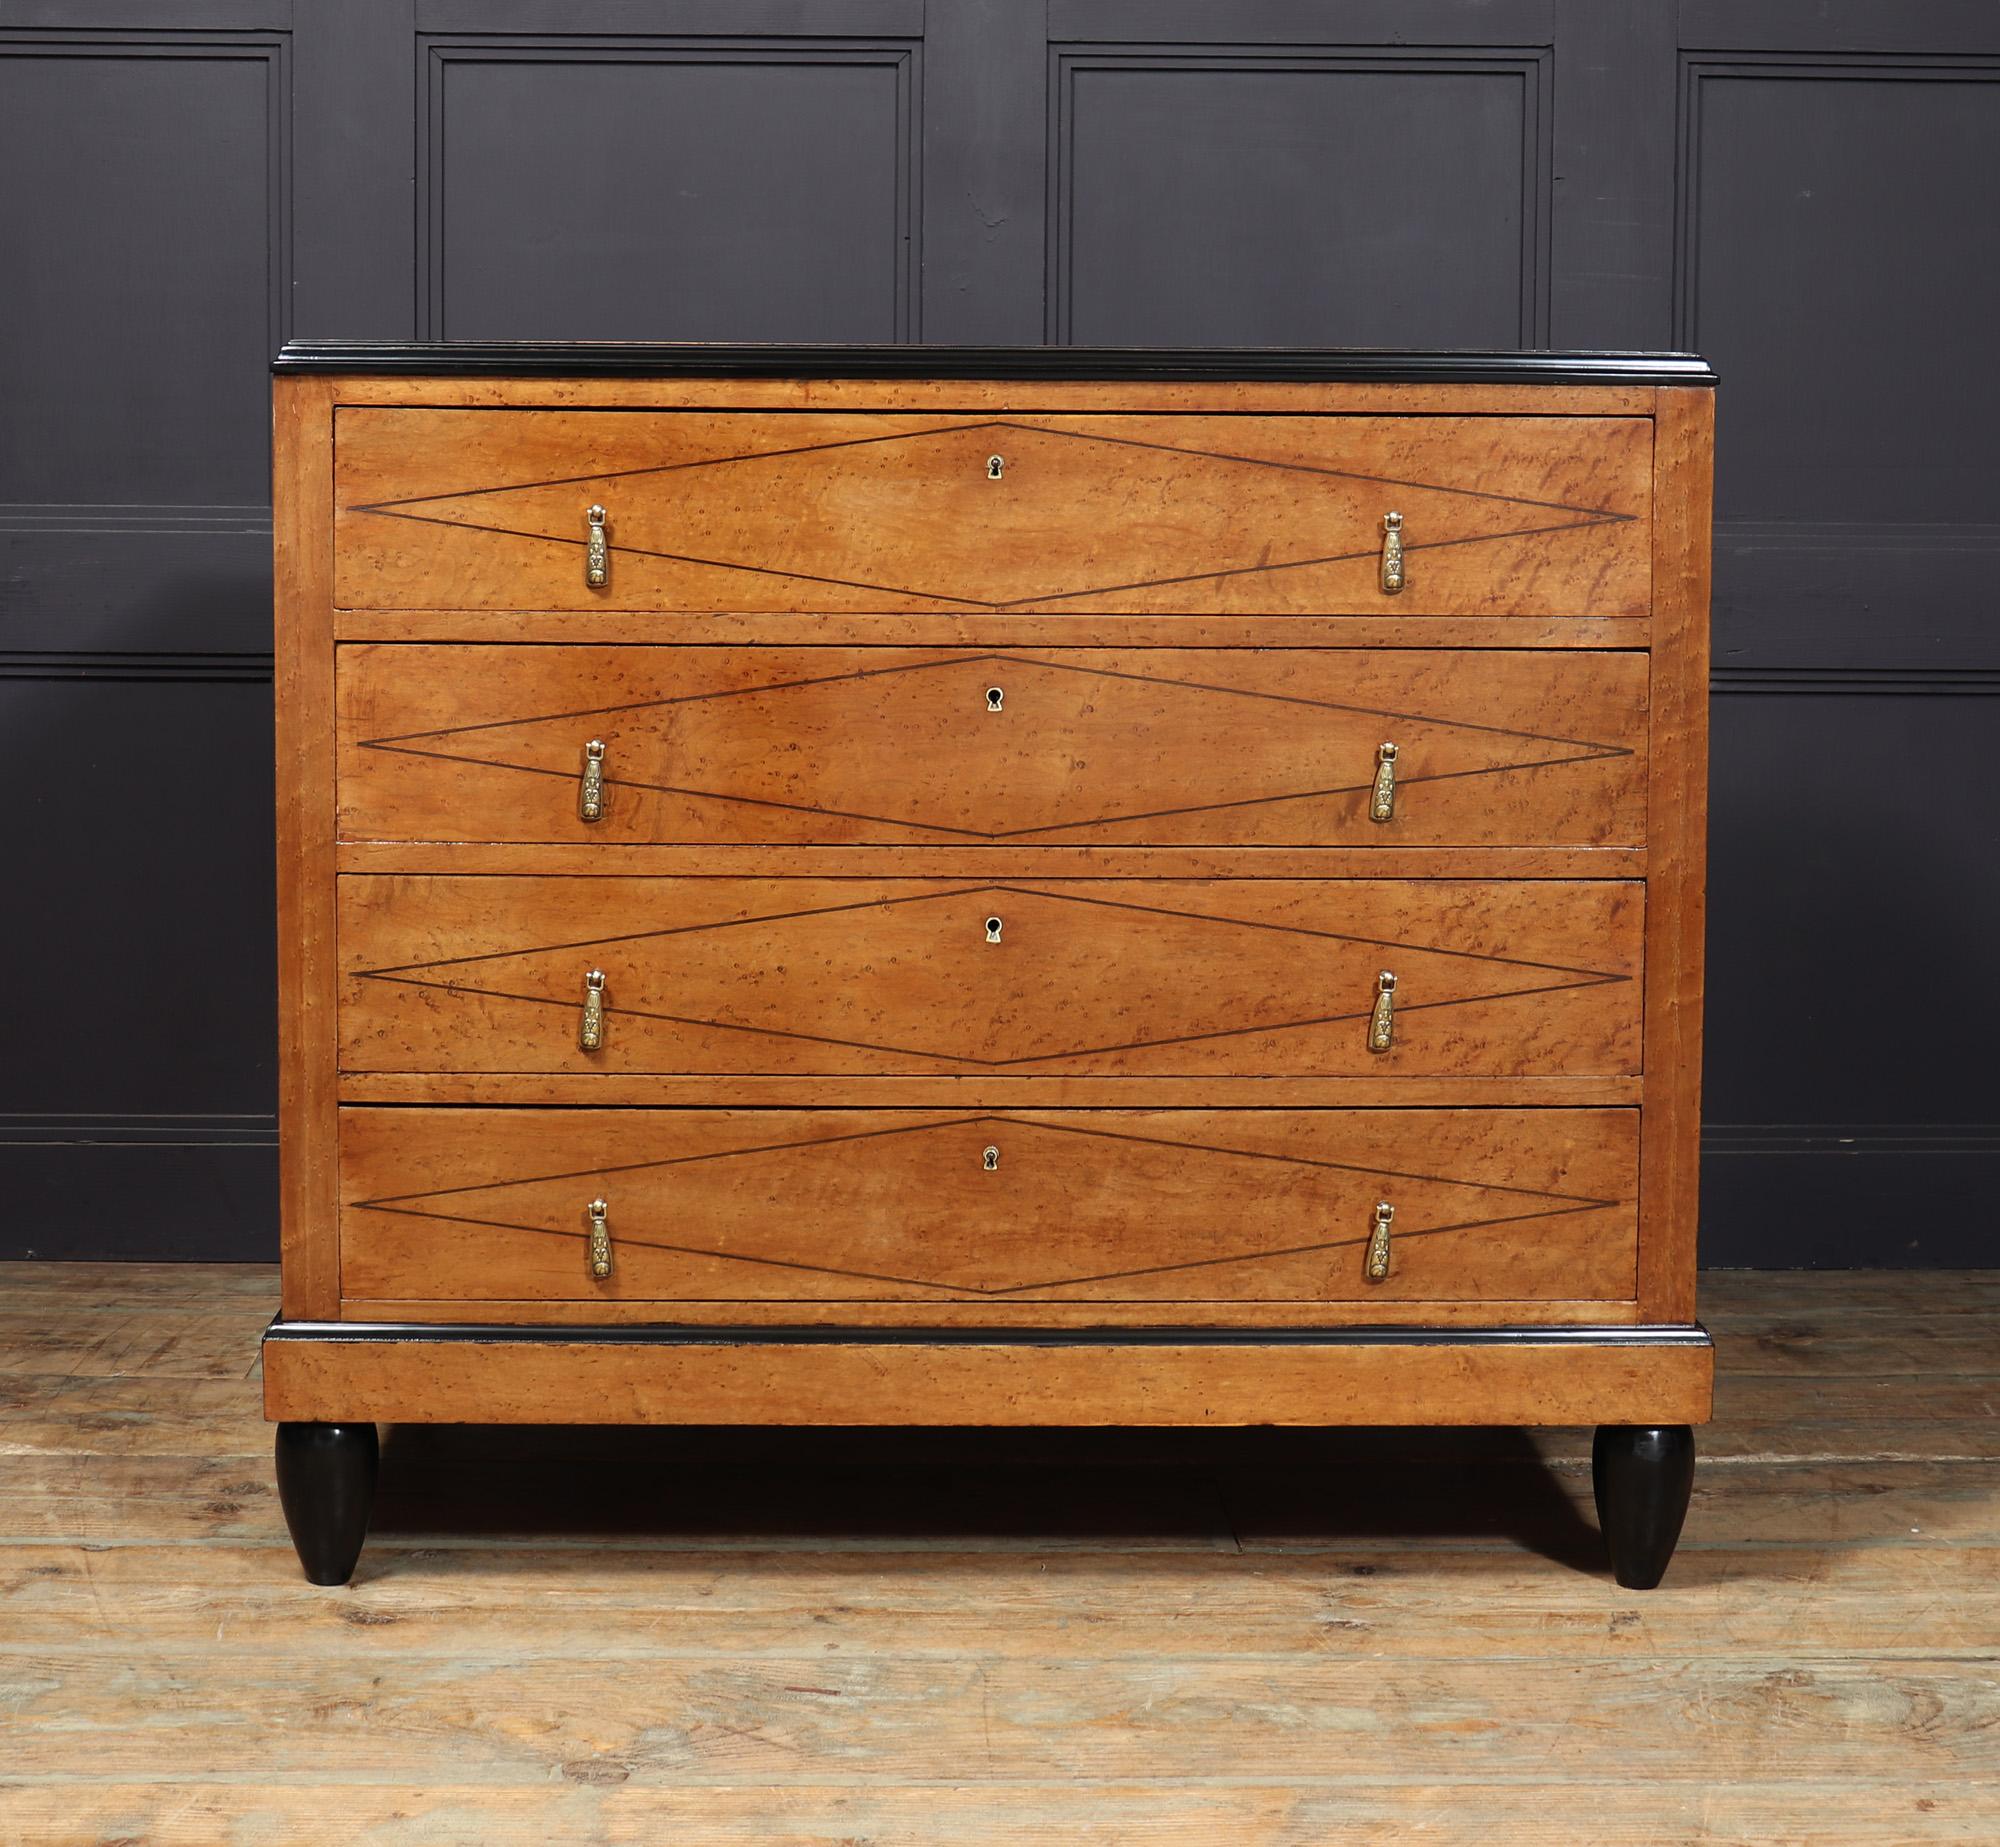 ART DECO CHEST OF DRAWERS 
A lovely little chest of drawers with four long drawers in Birdseye maple with string line inlay, brass drop handles standing on turned feet and ebonies detail, carefully restored and fully polished by hand and in great